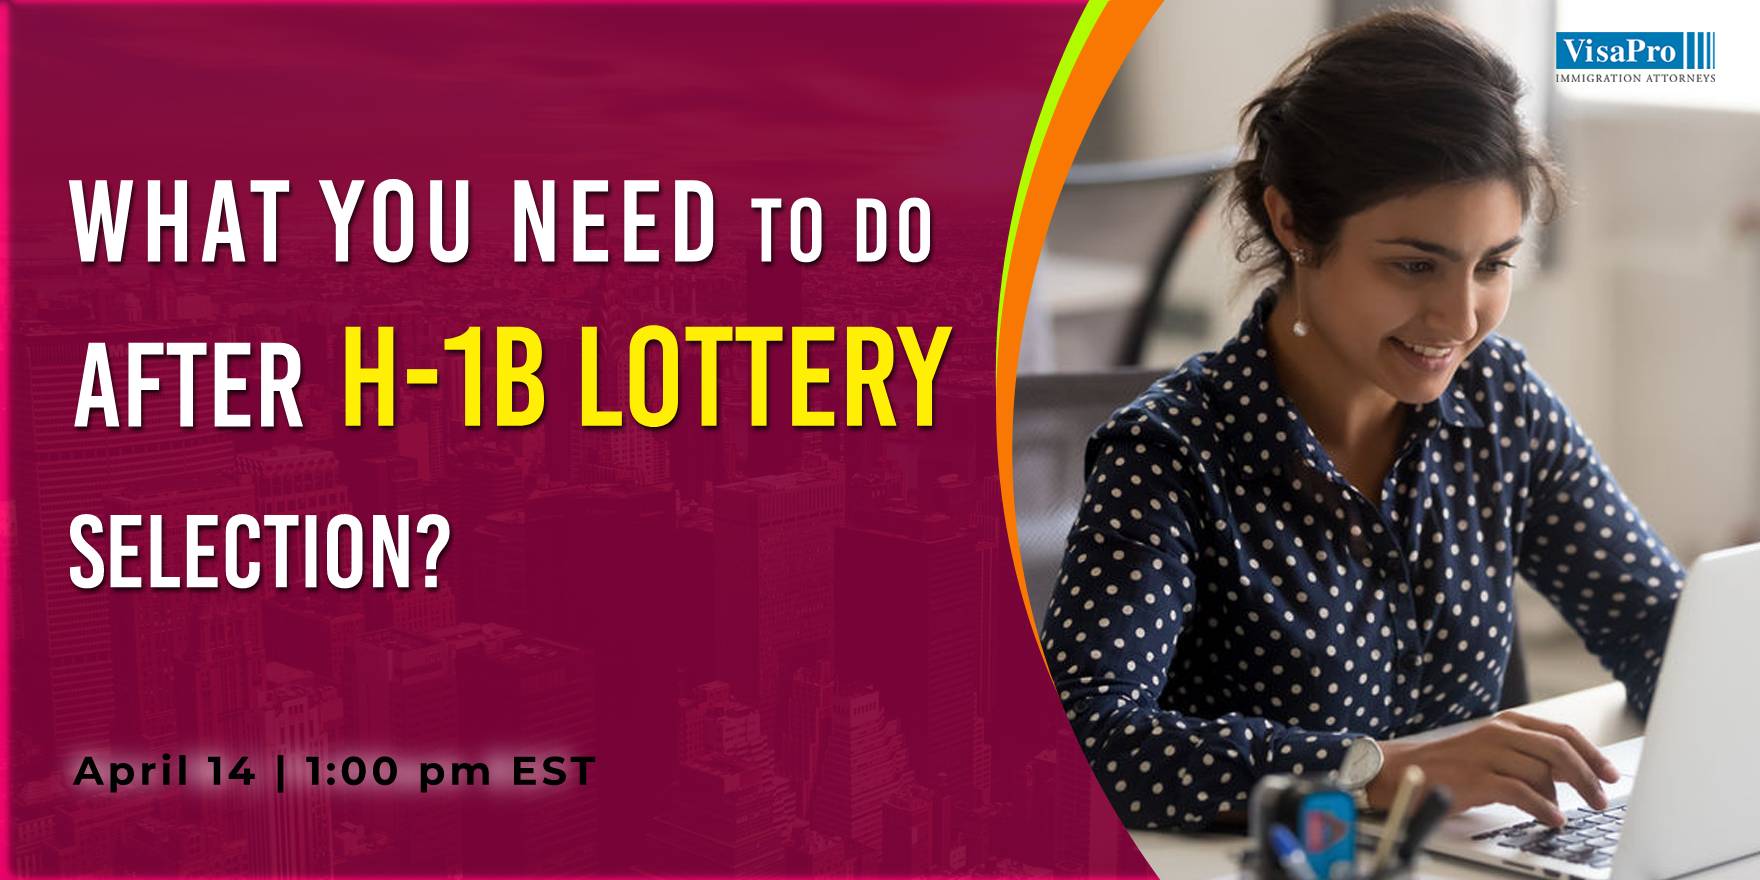 What You Need To Do After H-1B Lottery Selection?, Sydney, New South Wales, Australia